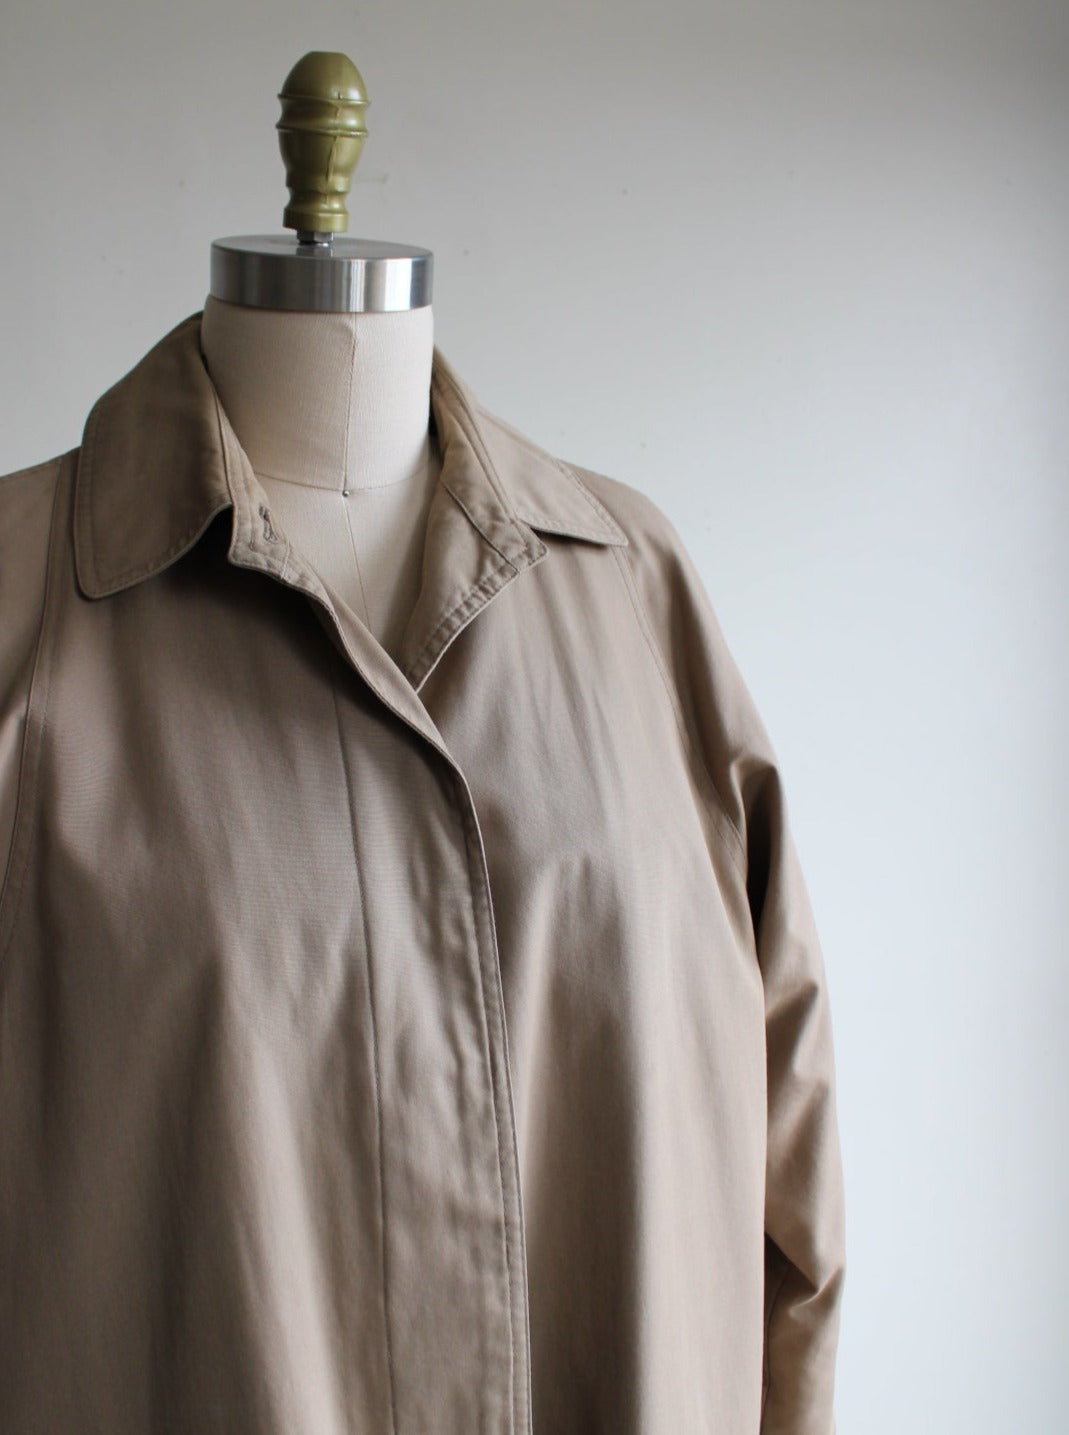 Vintage Khaki Mid Length Trench Coat / Field Jacket with Removable Wool Lining